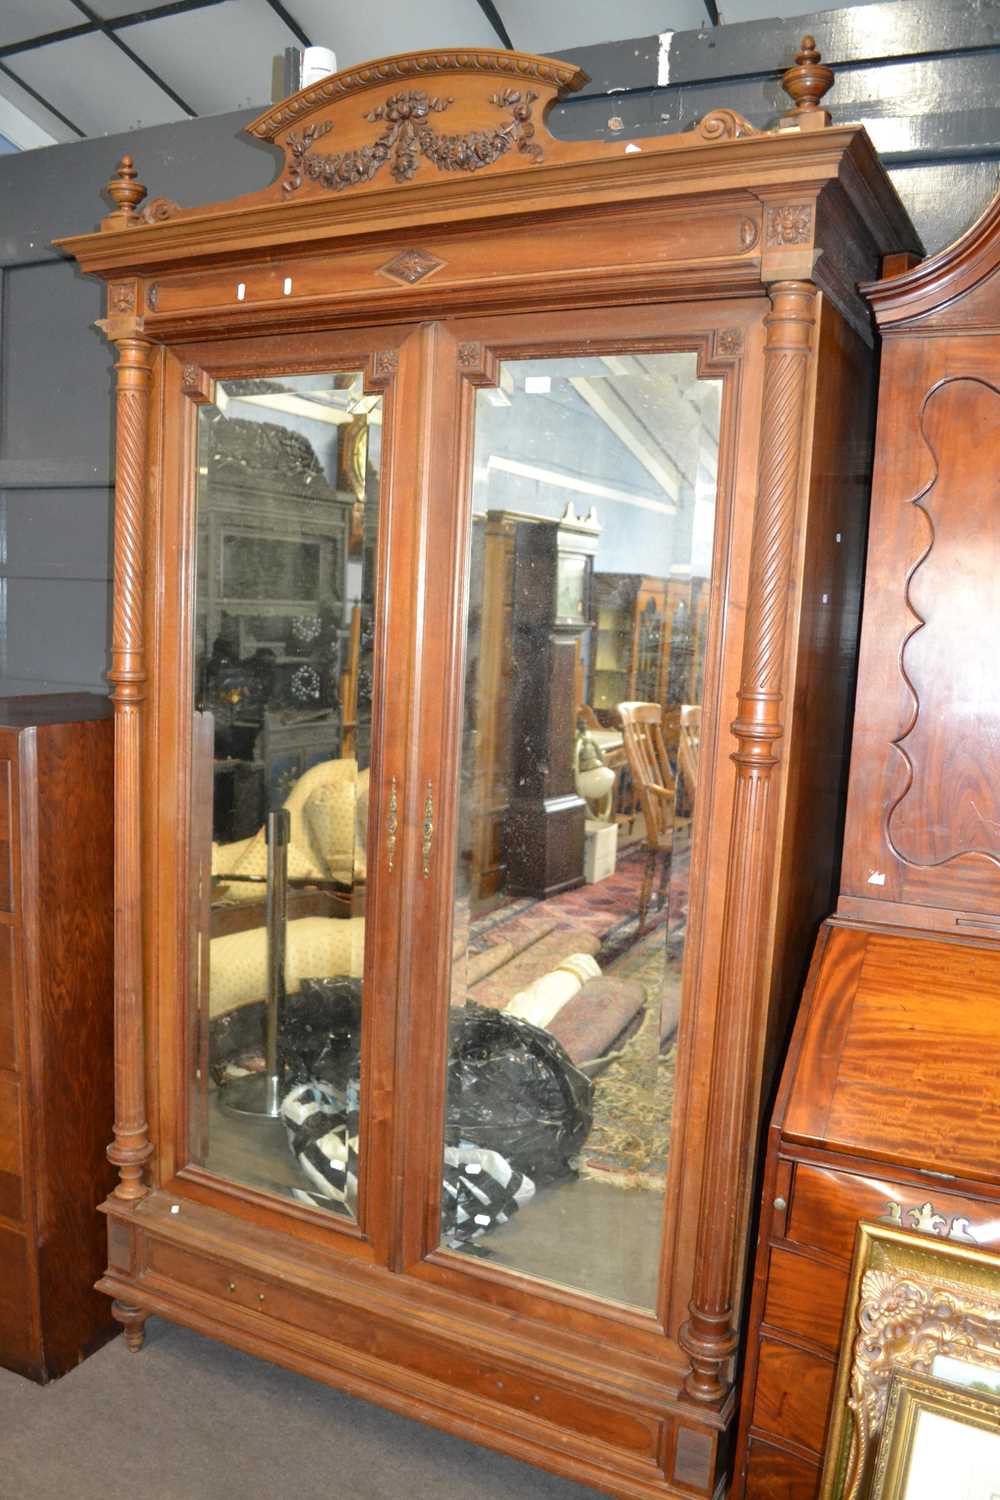 Late 19th Century continental walnut wardrobe or cupboard with arched pediment, two doors with